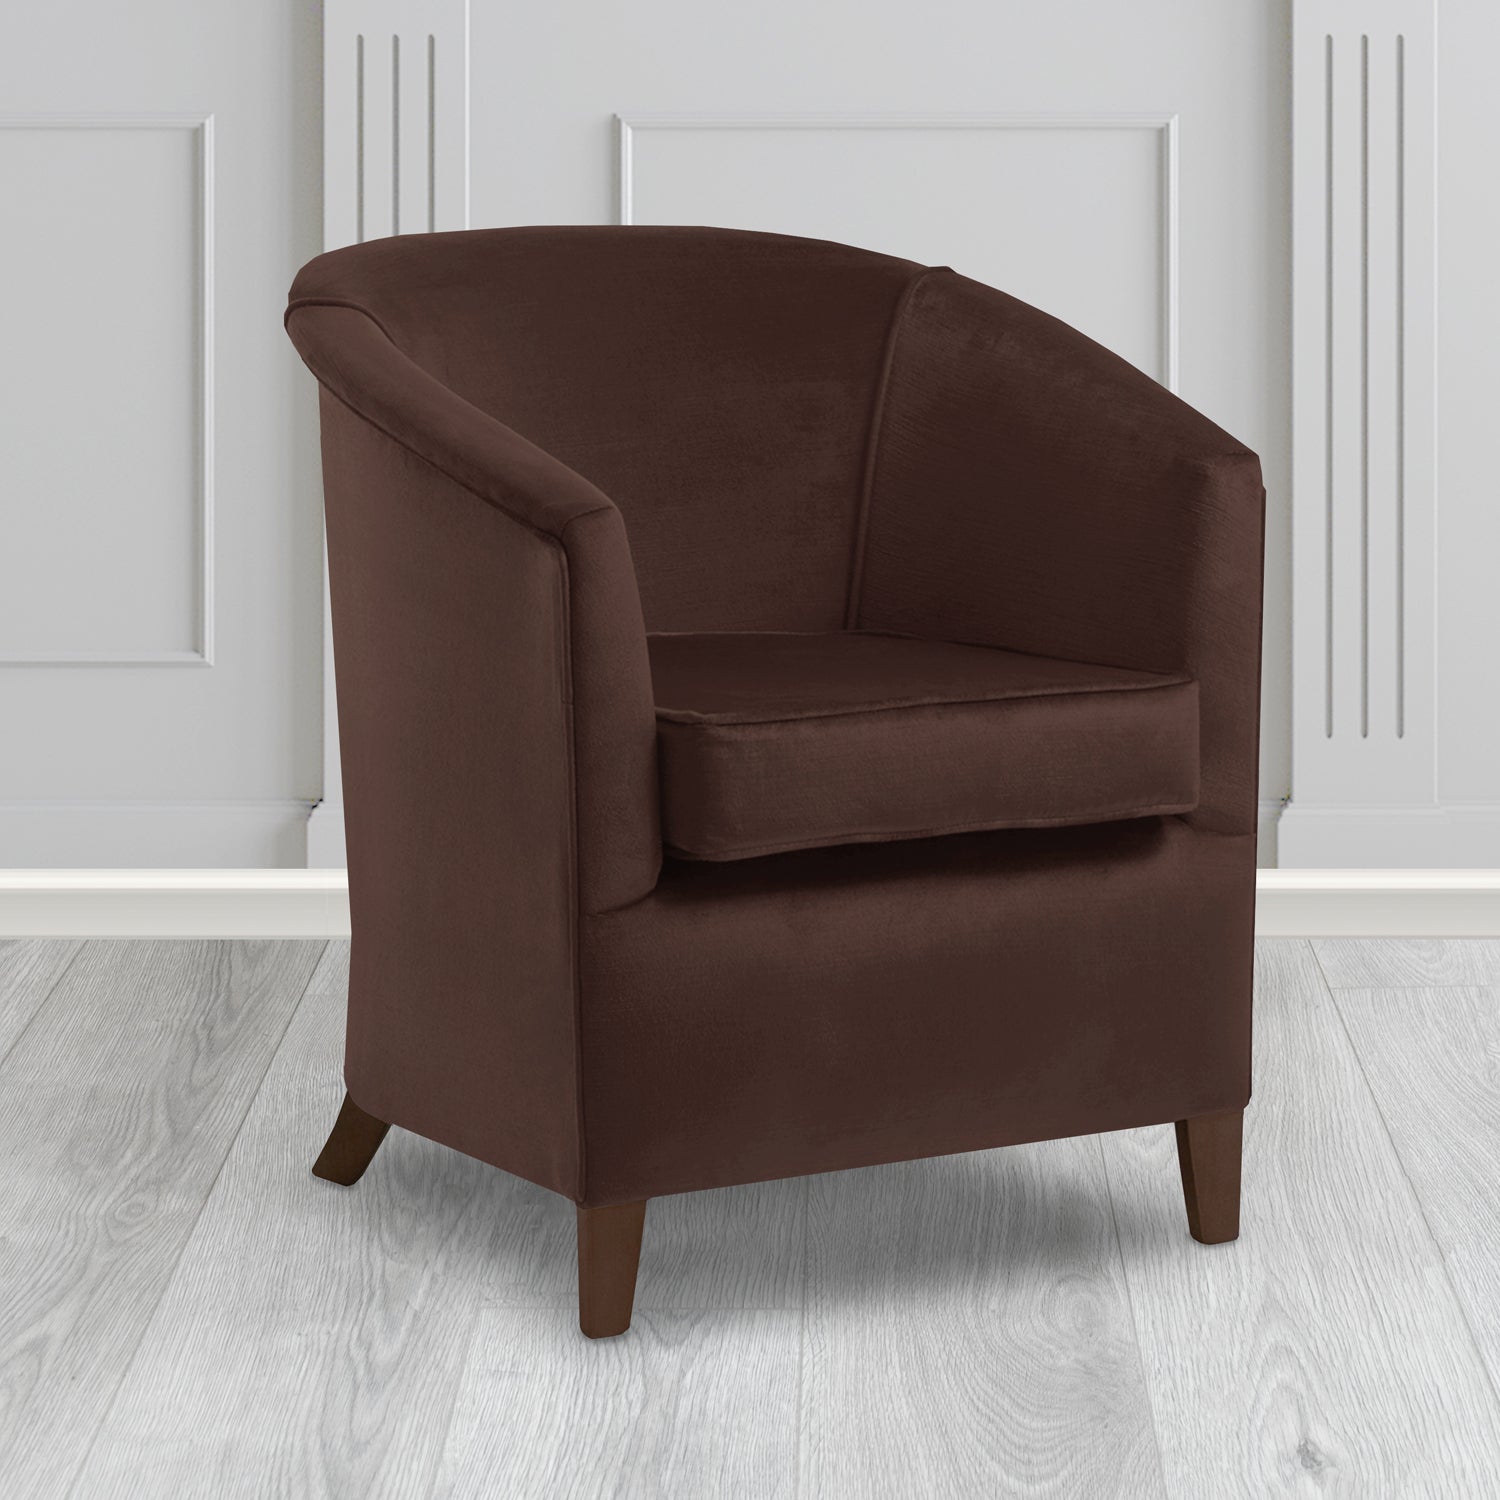 Jasmine Tub Chair in Noble 702 Chocolate Crib 5 Velvet Fabric - Water Resistant - The Tub Chair Shop